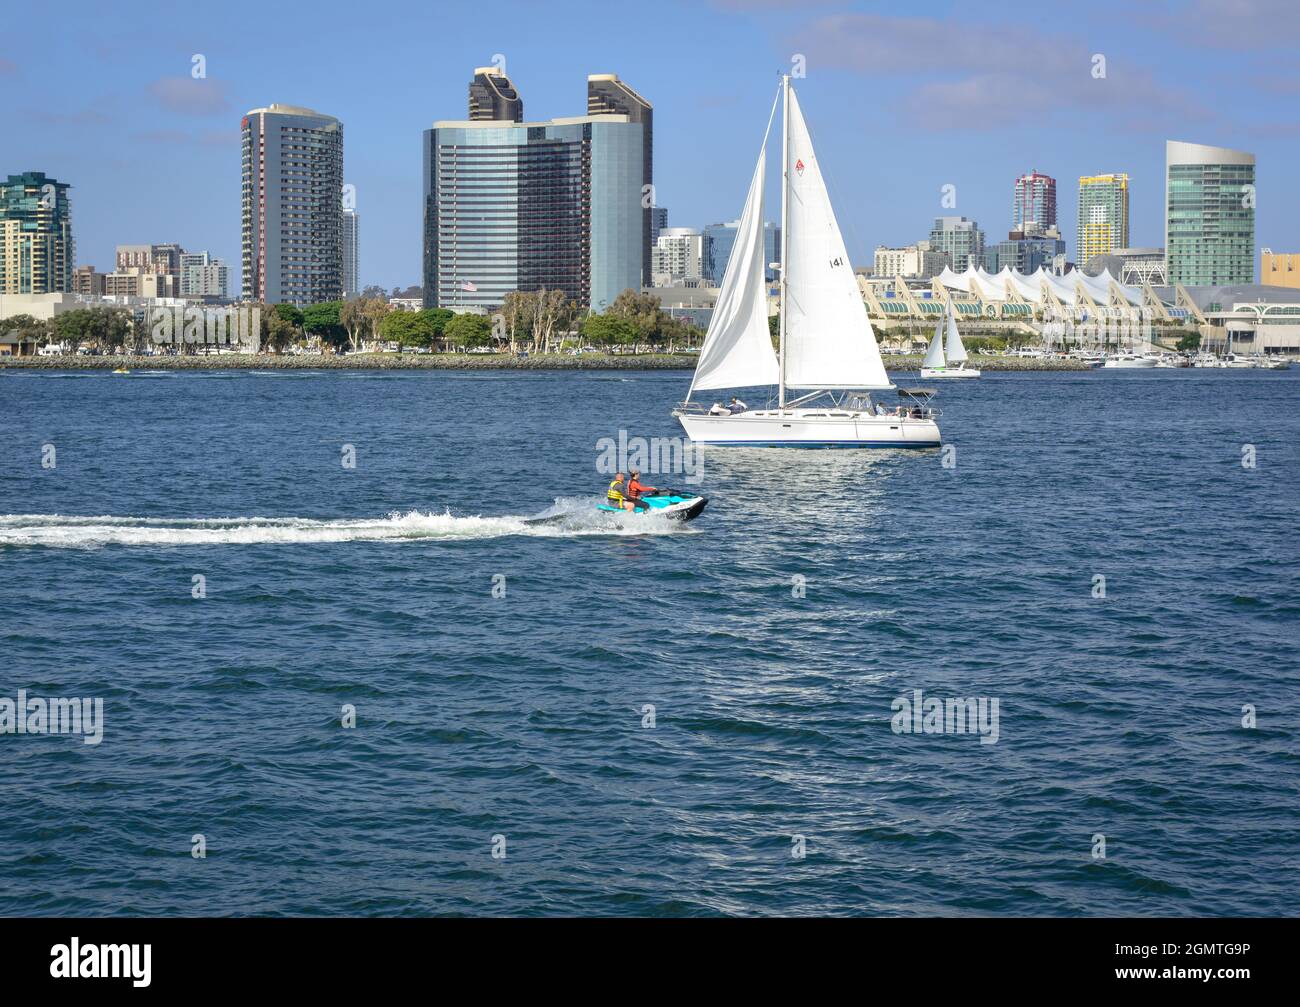 A speeding jet ski along side sailboats leisurely sailing on the blue water bay before an impressive San Diego skyline in Southern California Stock Photo